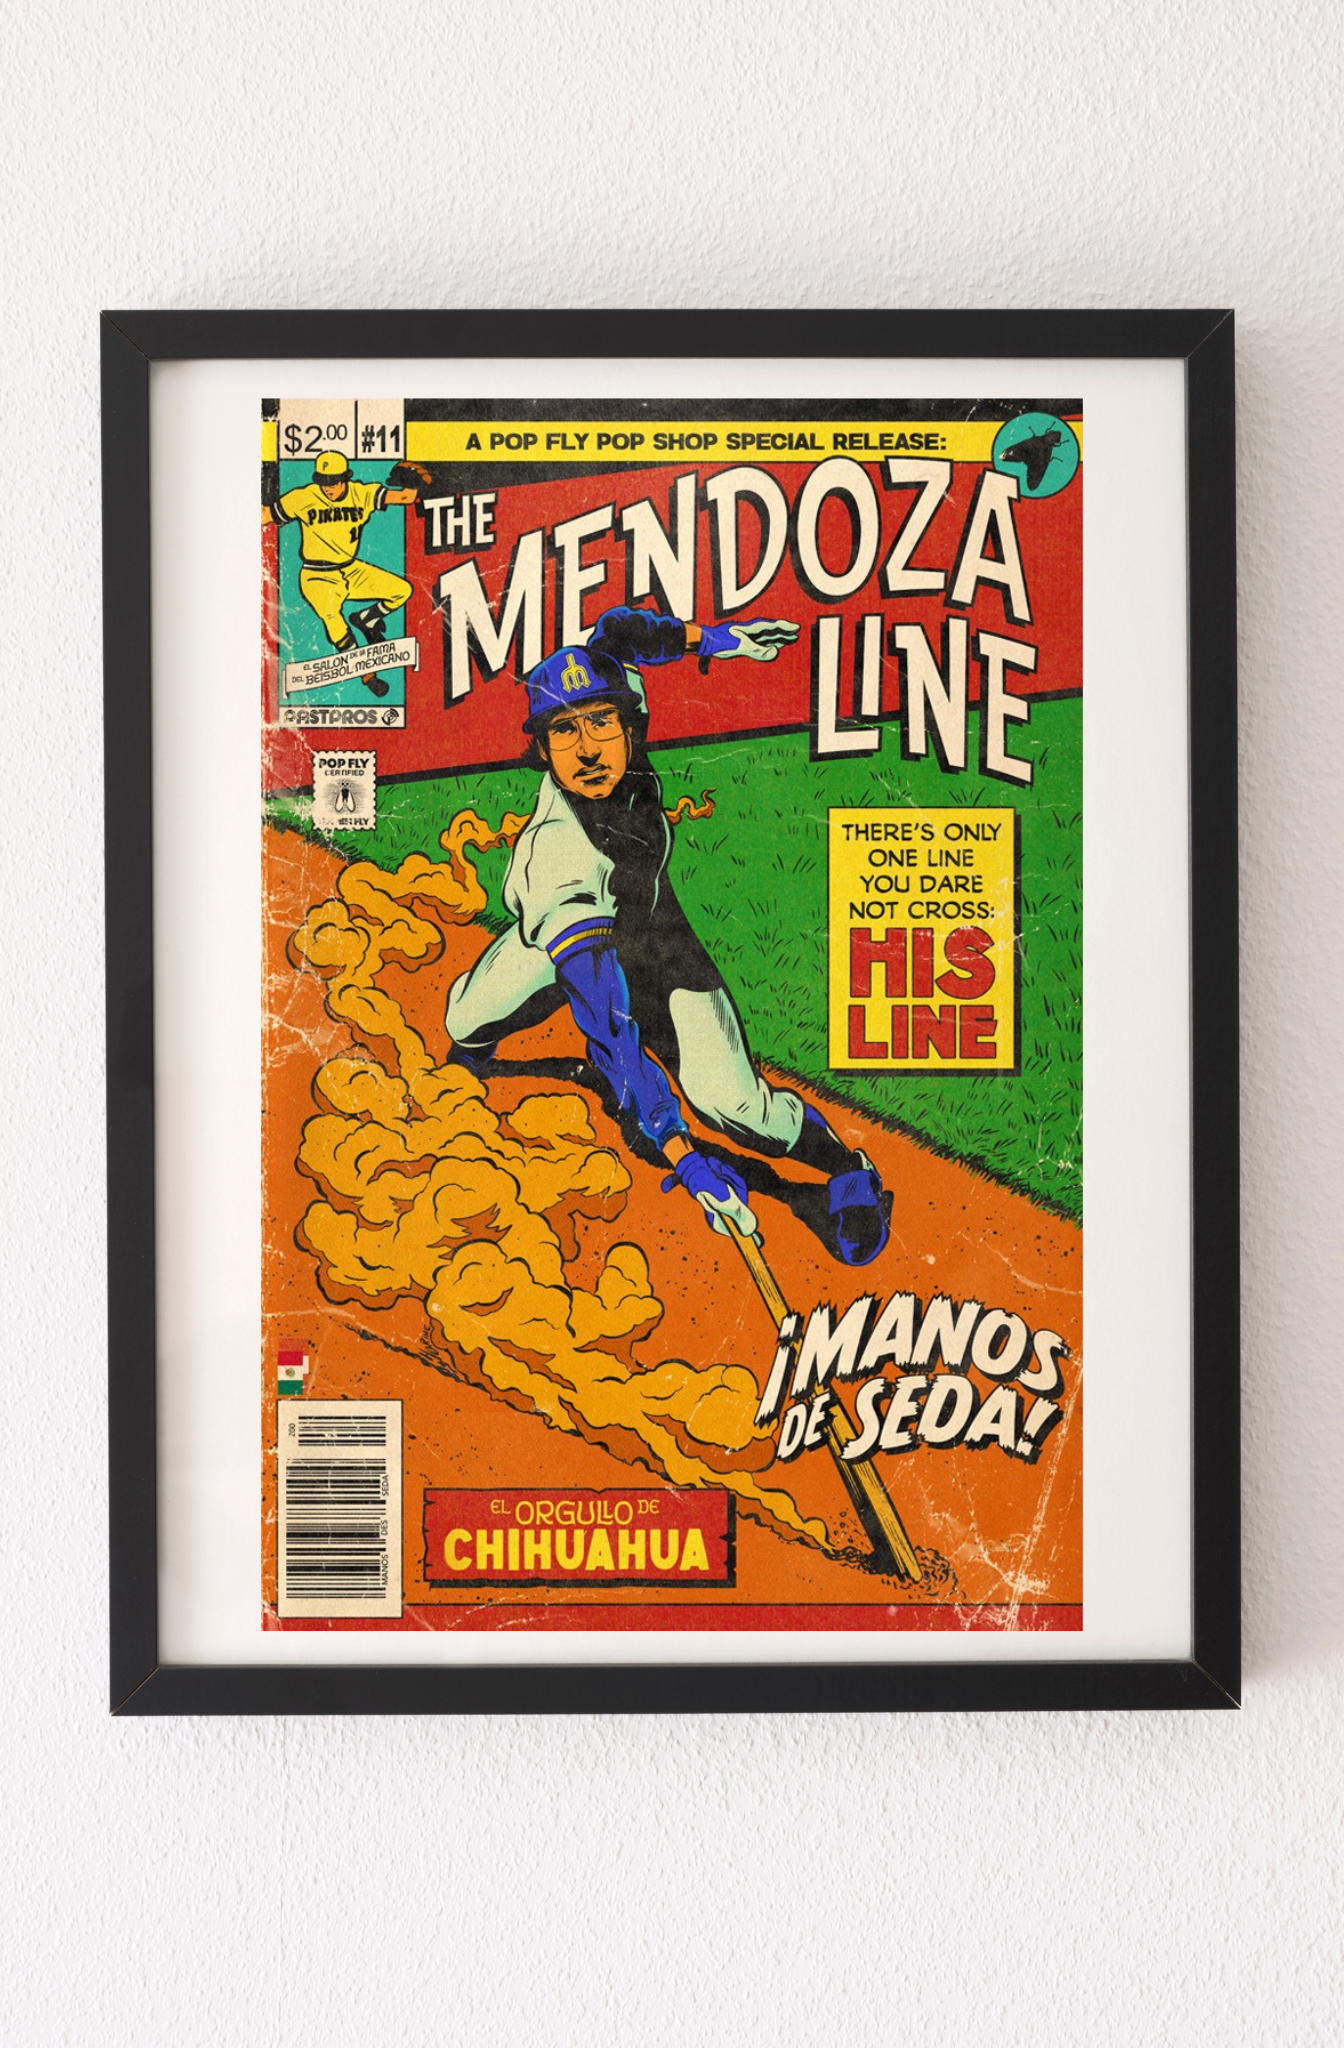 106. (SOLD OUT) "The Mendoza Line" 7" x 10.5" Art Print